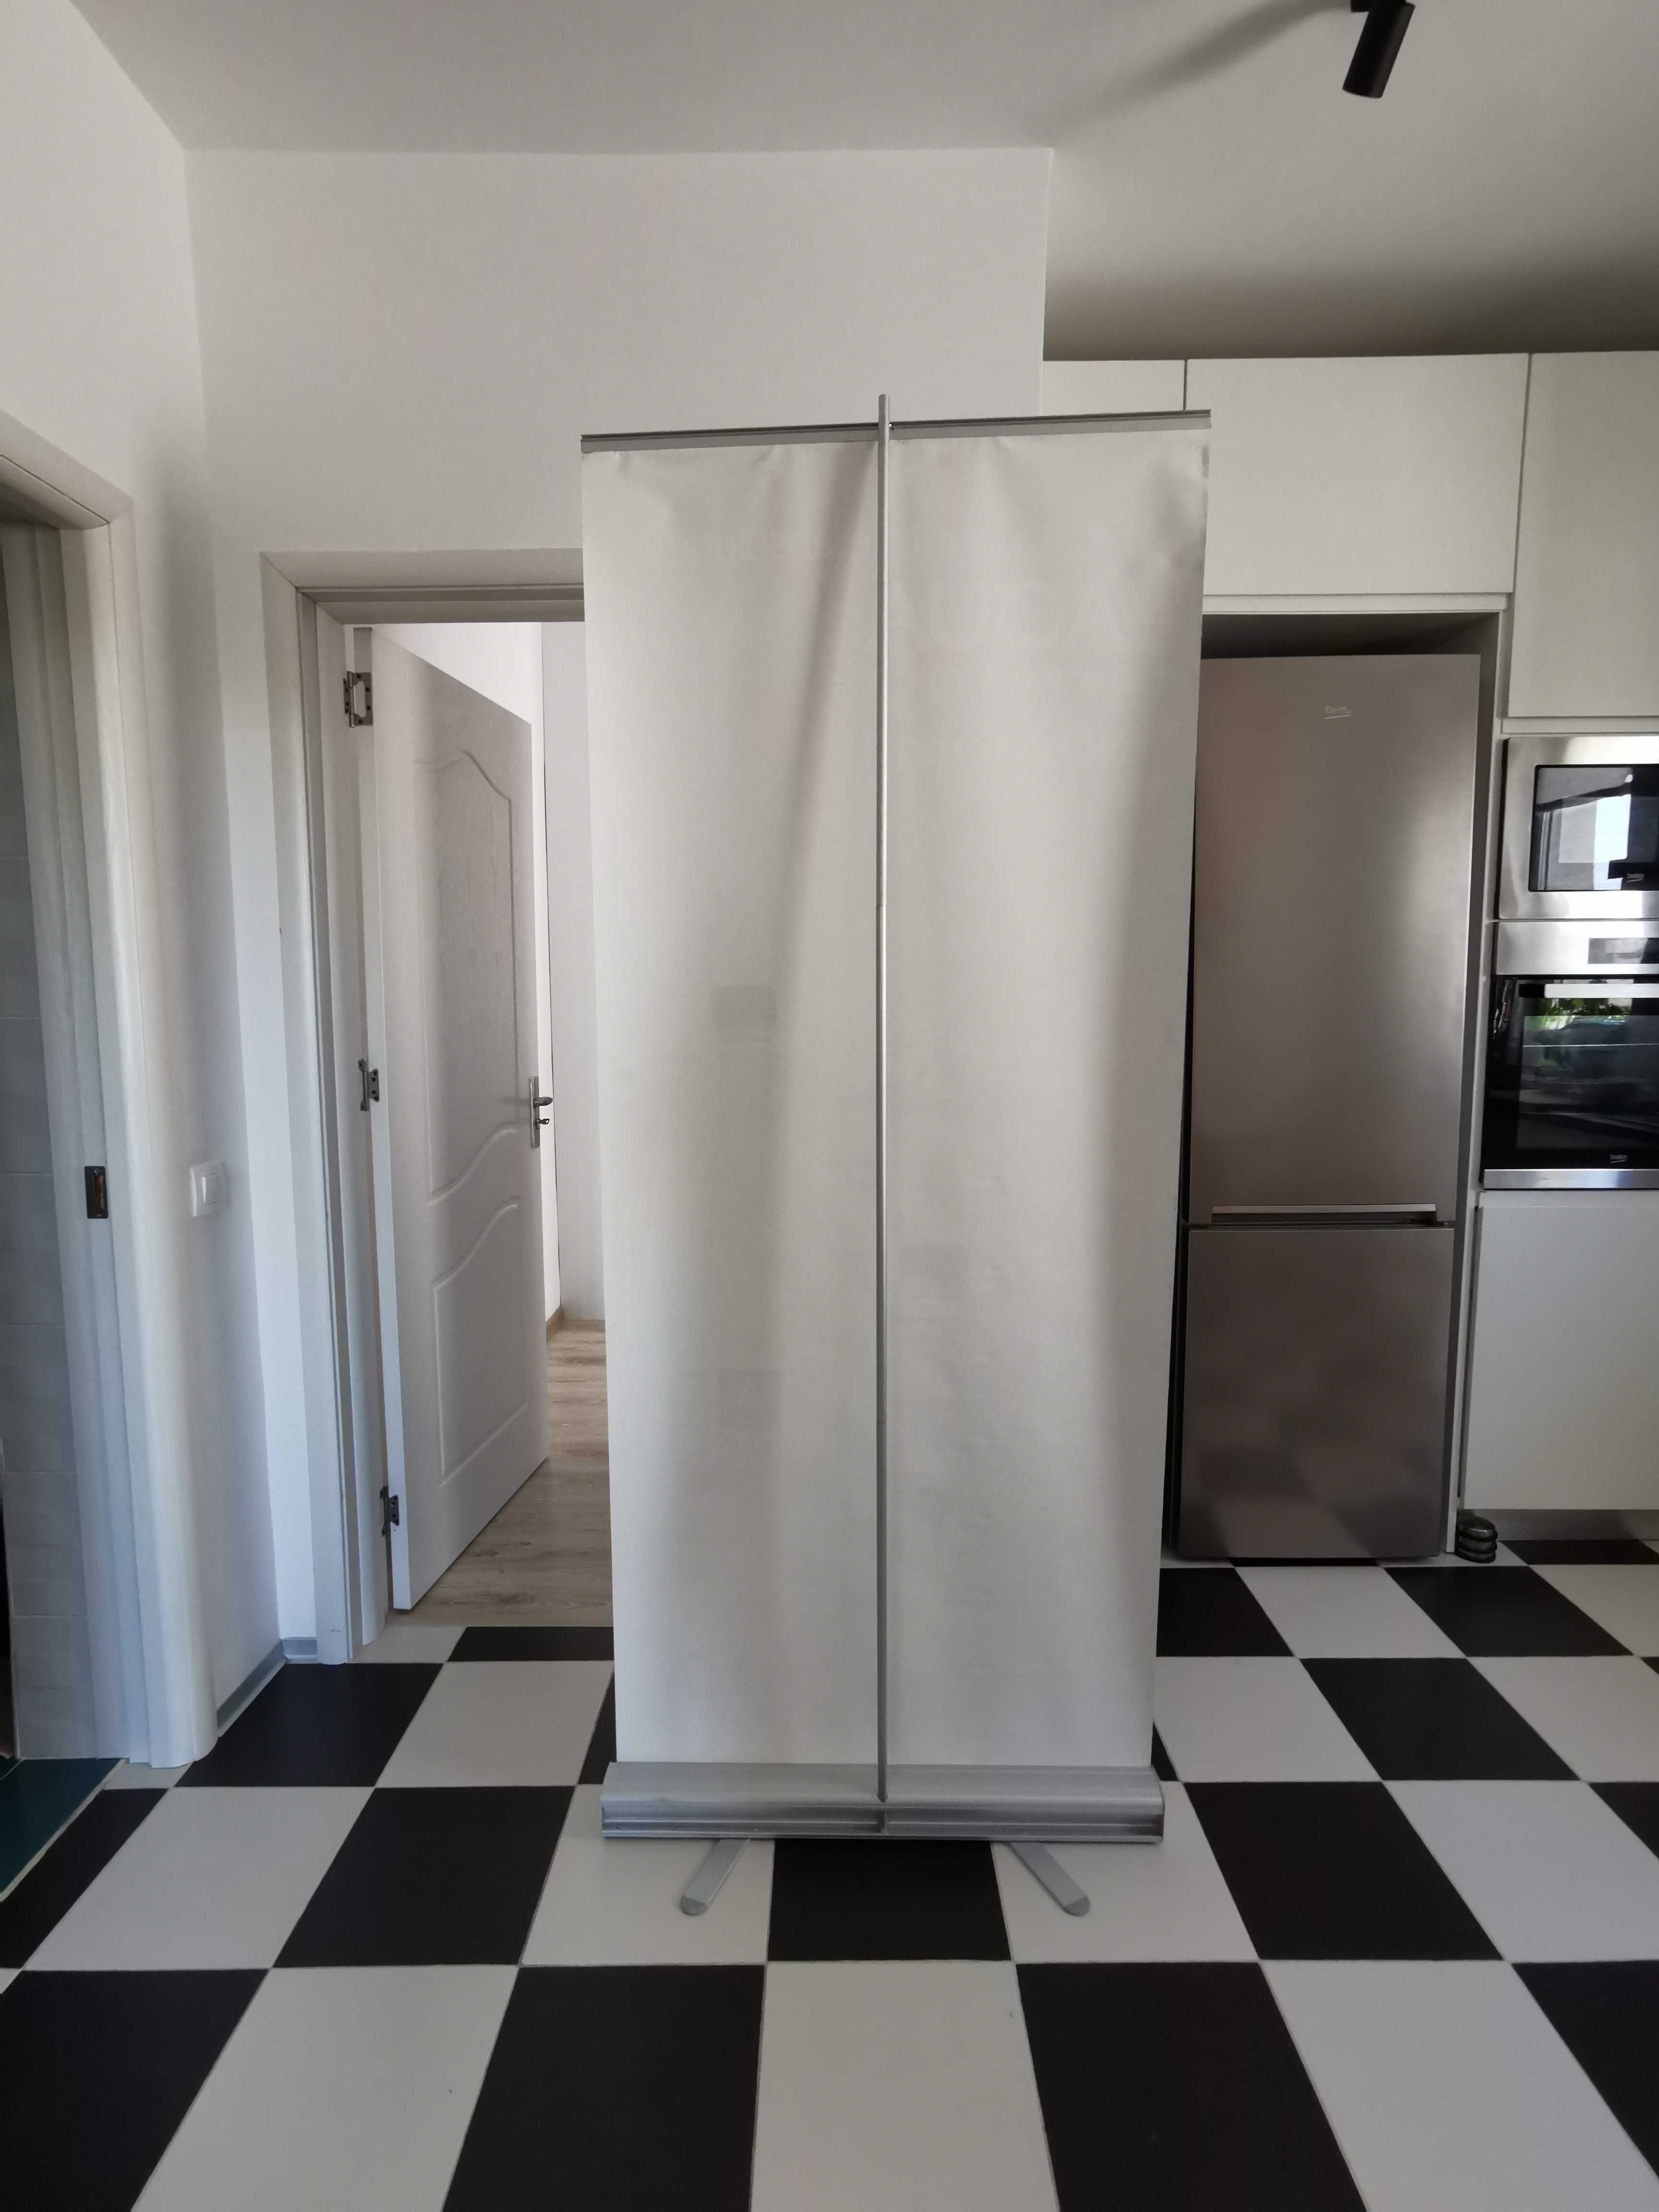 Roll up rollup Reclama banner vertical 80 x 200 evenimente expozitii